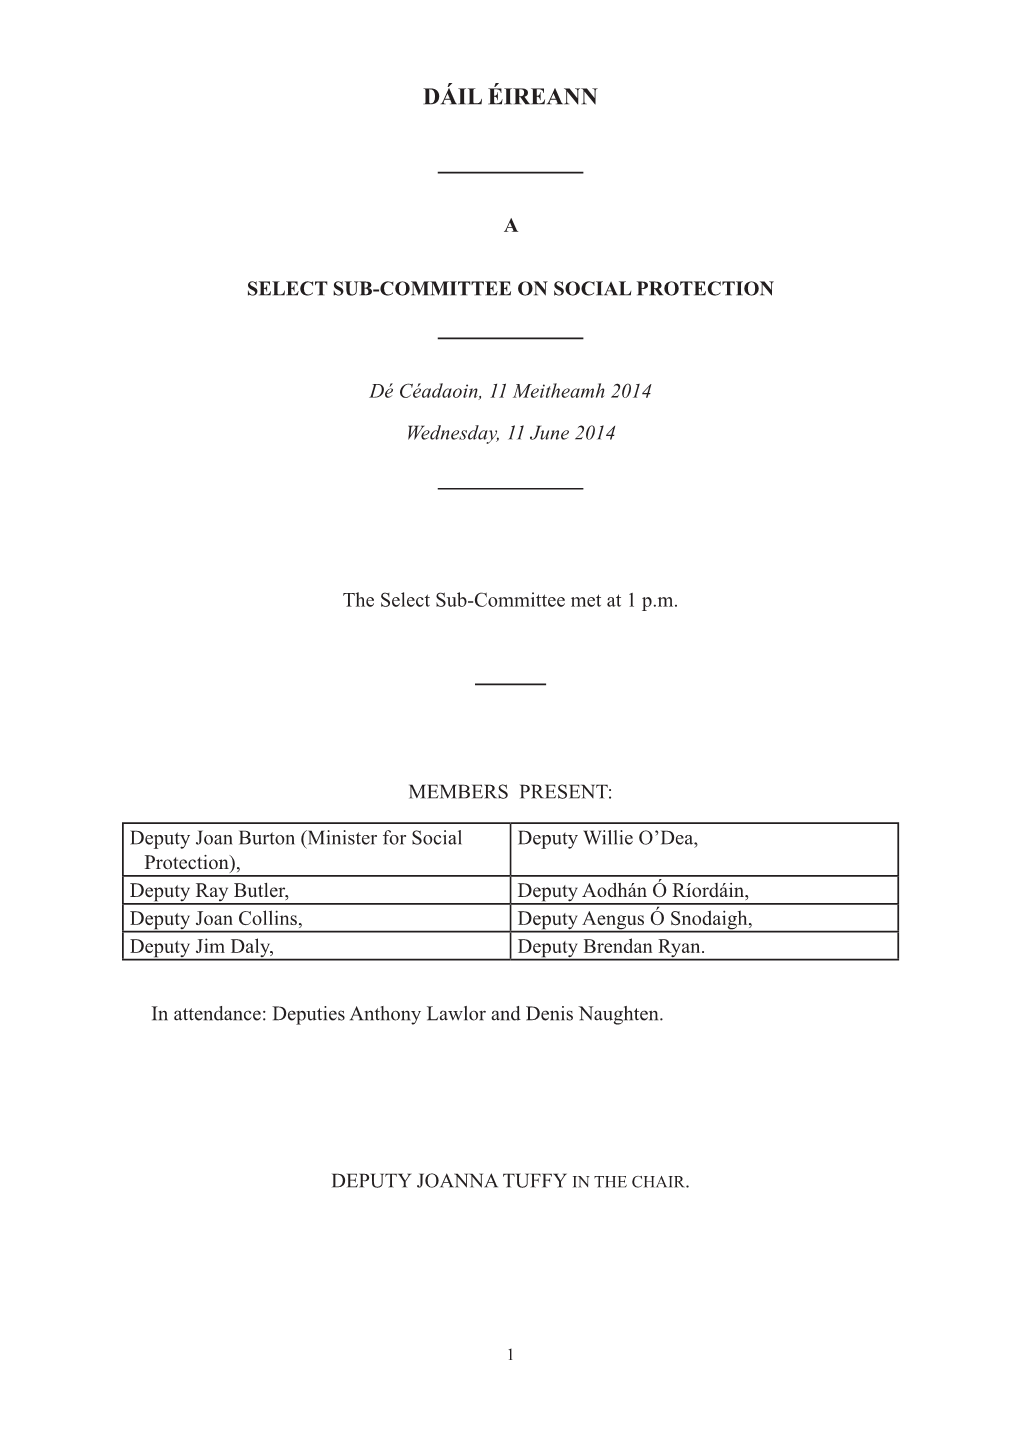 Select Sub-Committee on Social Protection